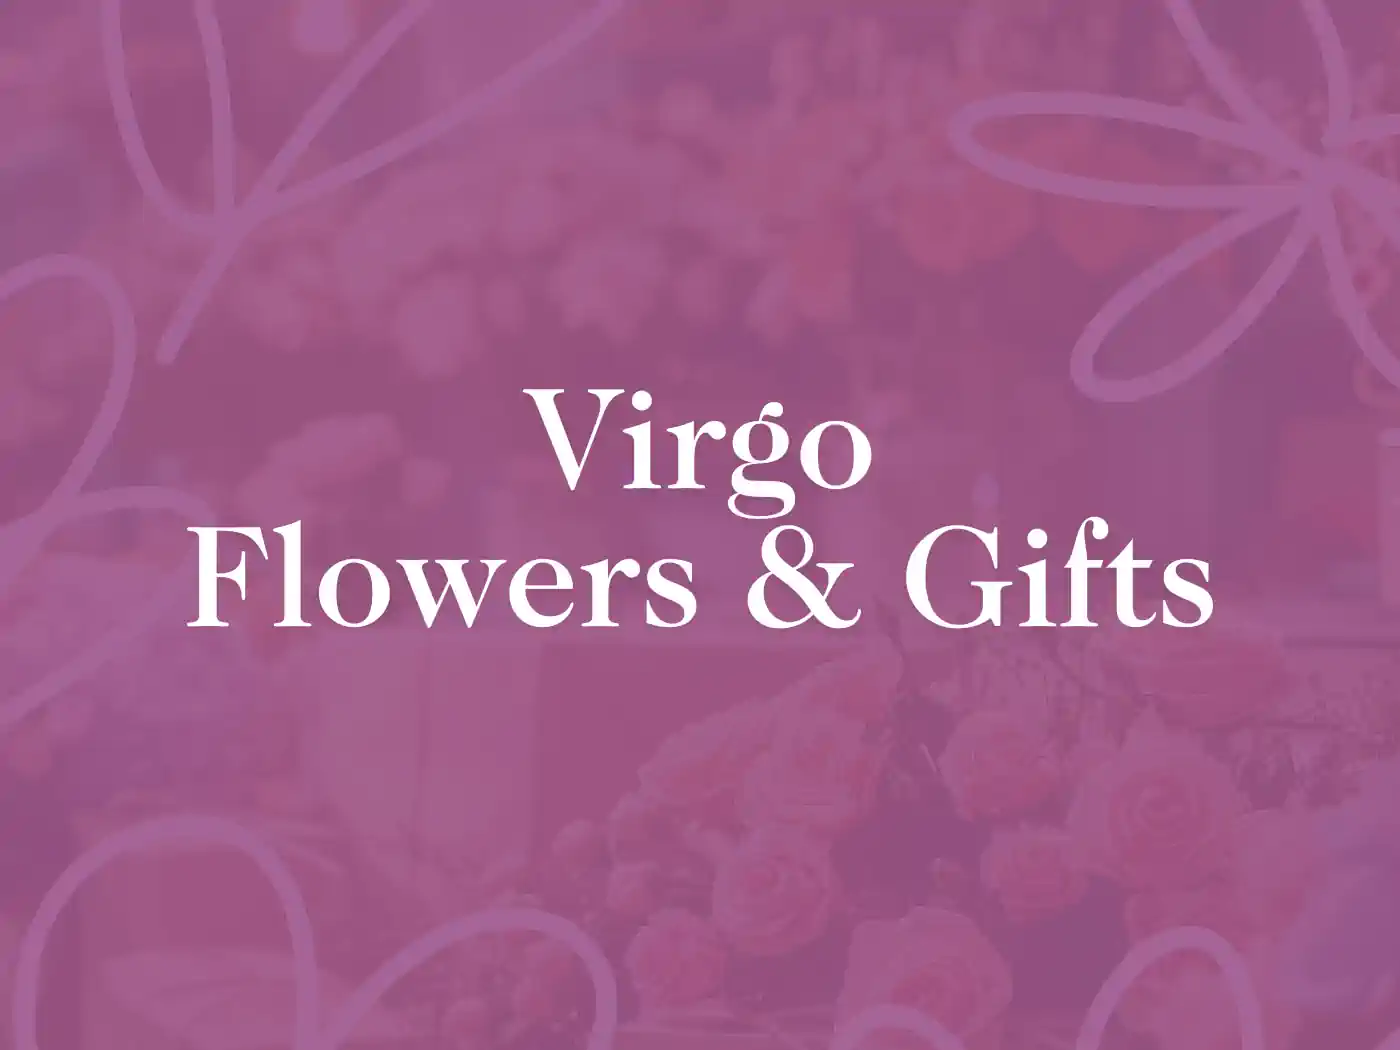 An elegant display of Virgo Flowers & Gifts branding, showcasing the sophistication and charm of their floral and gift offerings. Fabulous Flowers and Gifts.